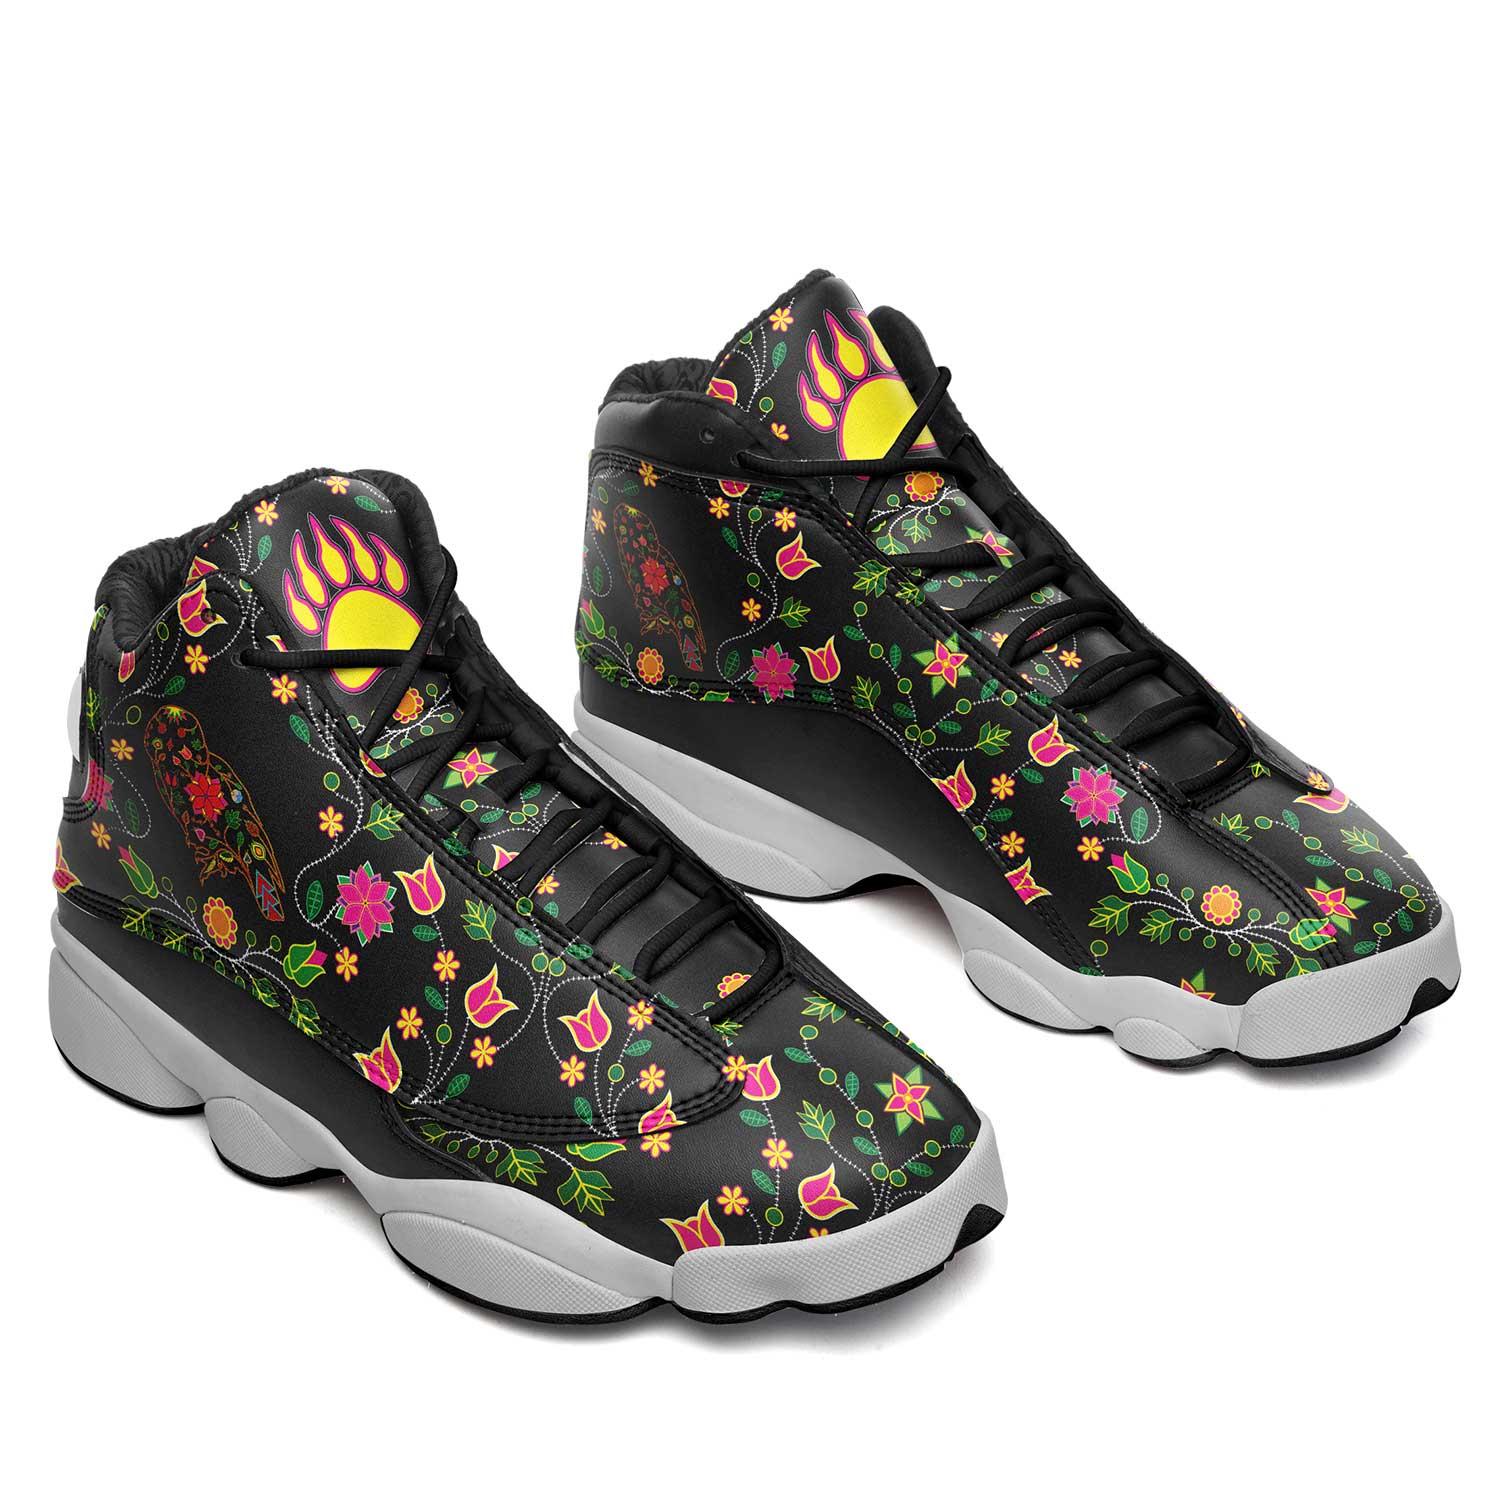 Floral Bearpaw Owl Isstsokini Athletic Shoes Herman 